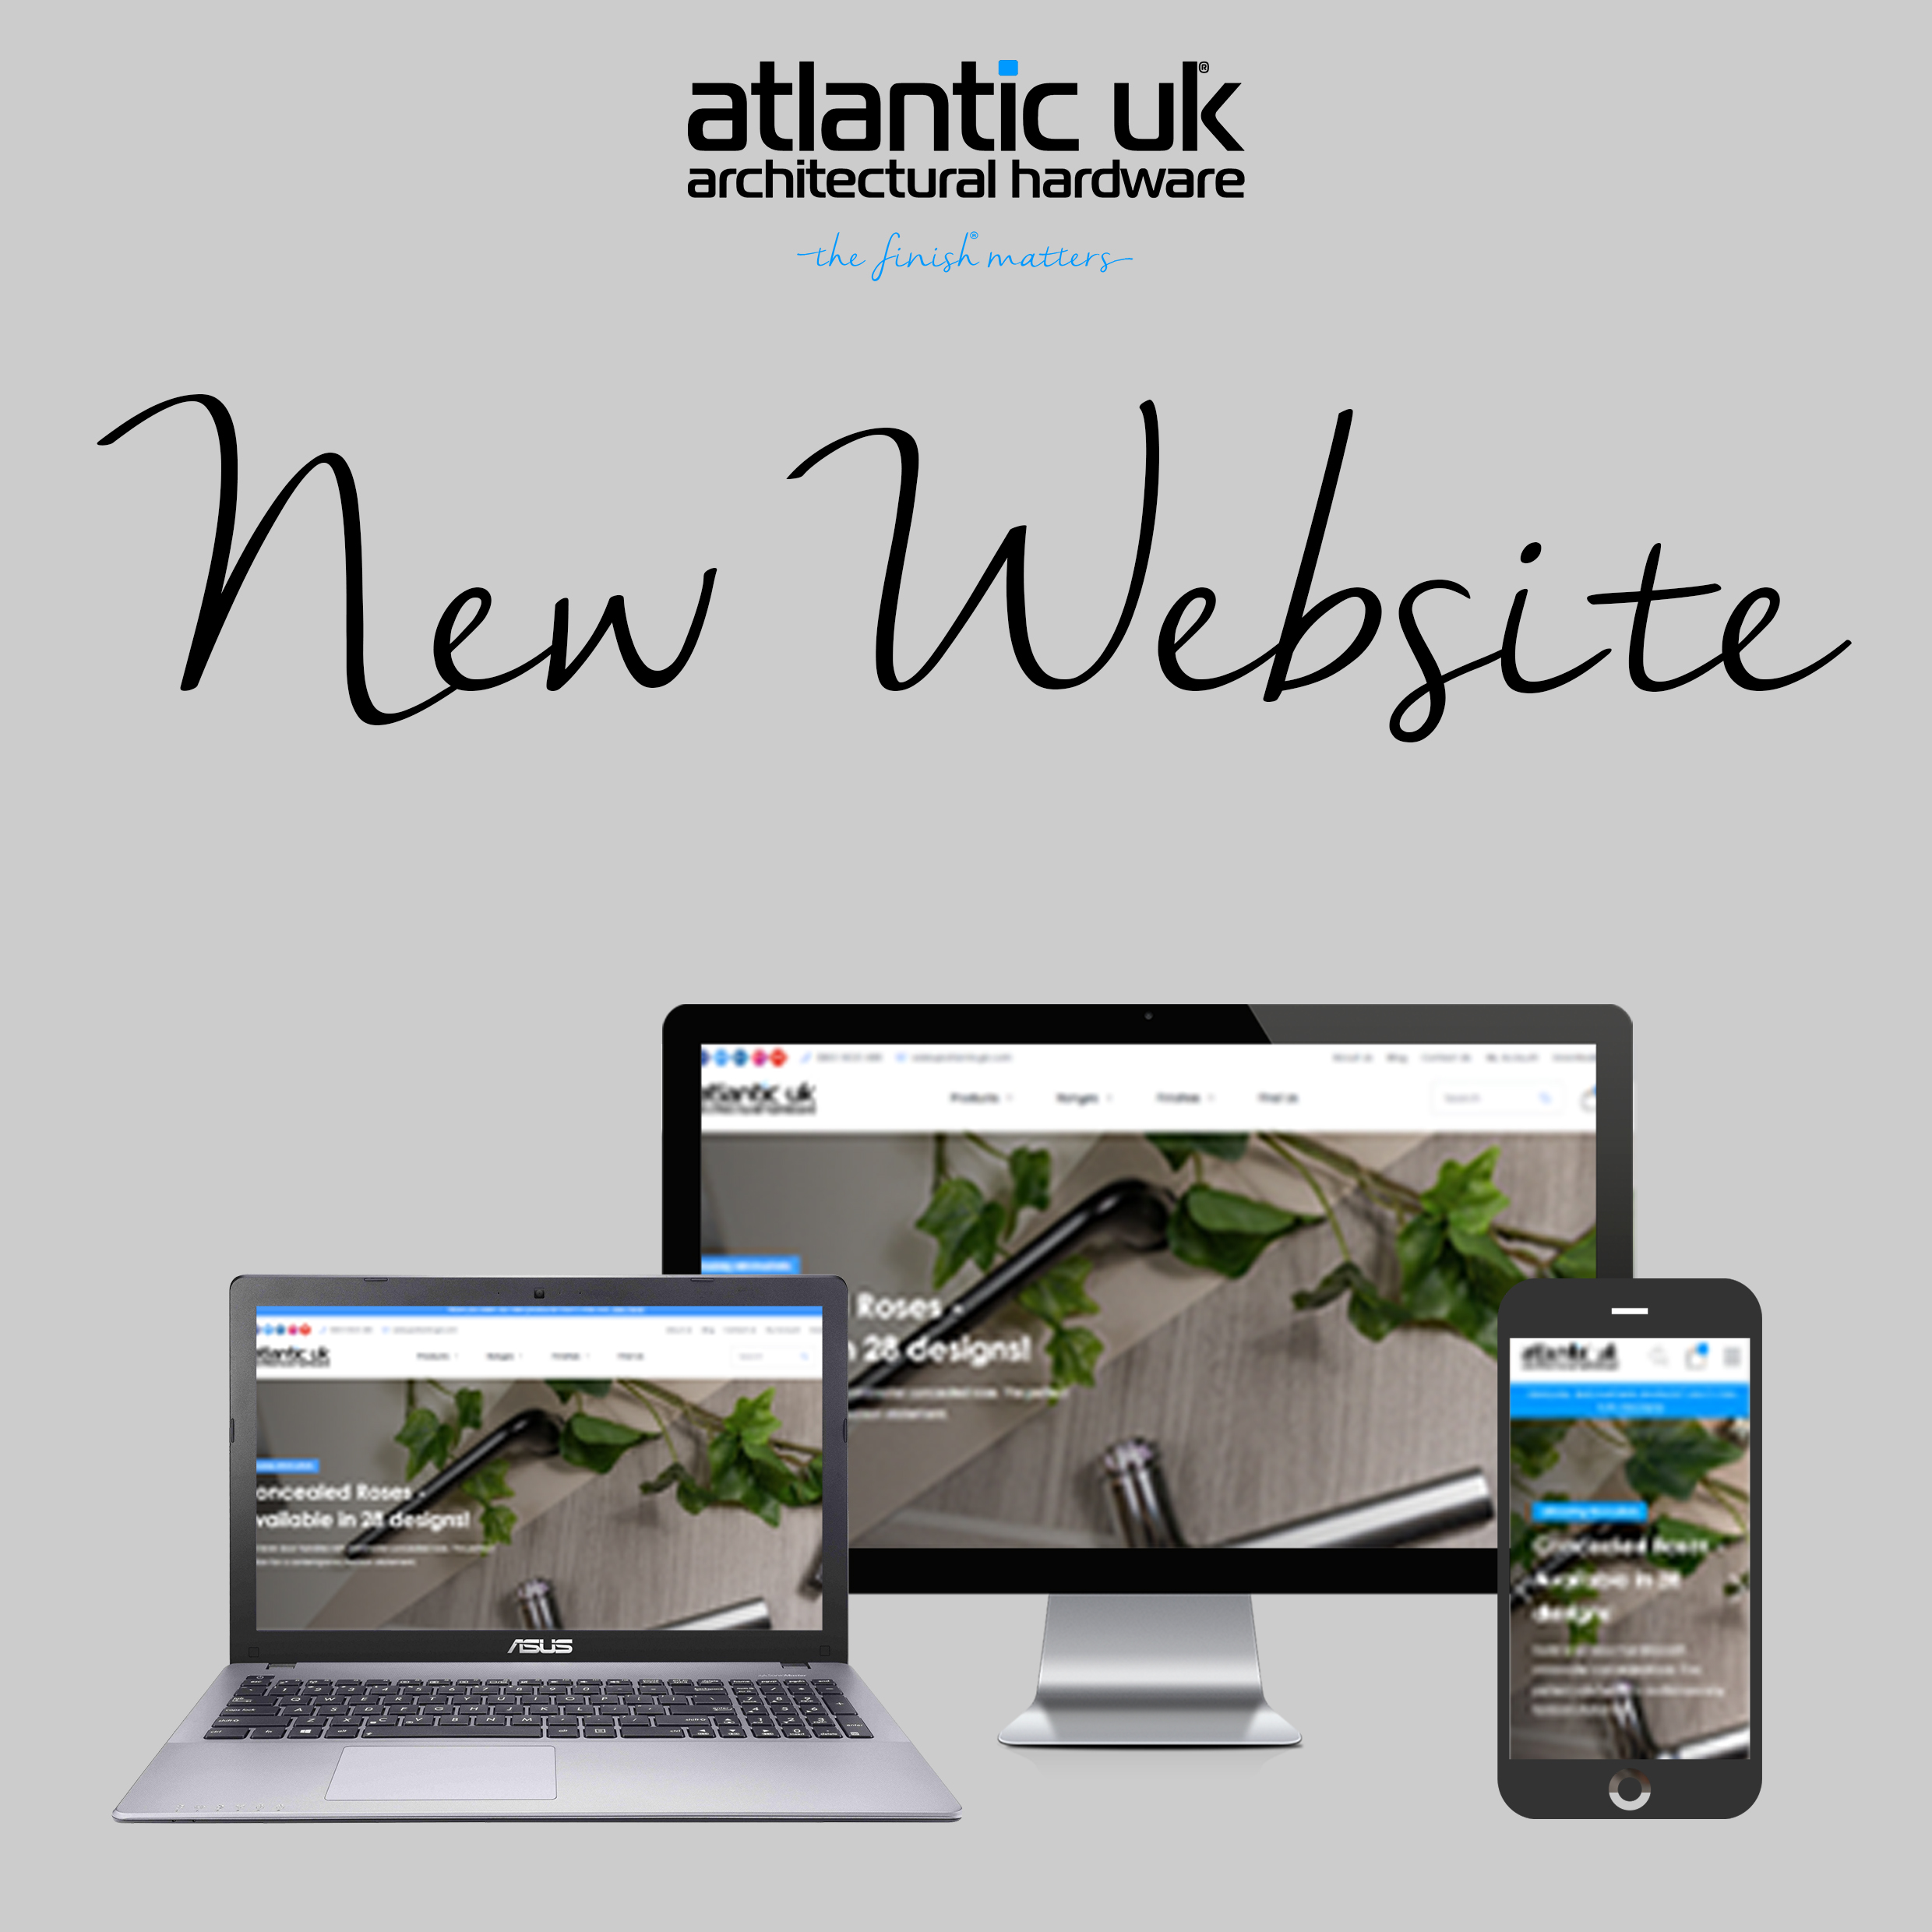 Our Website is Back, Better than Ever!